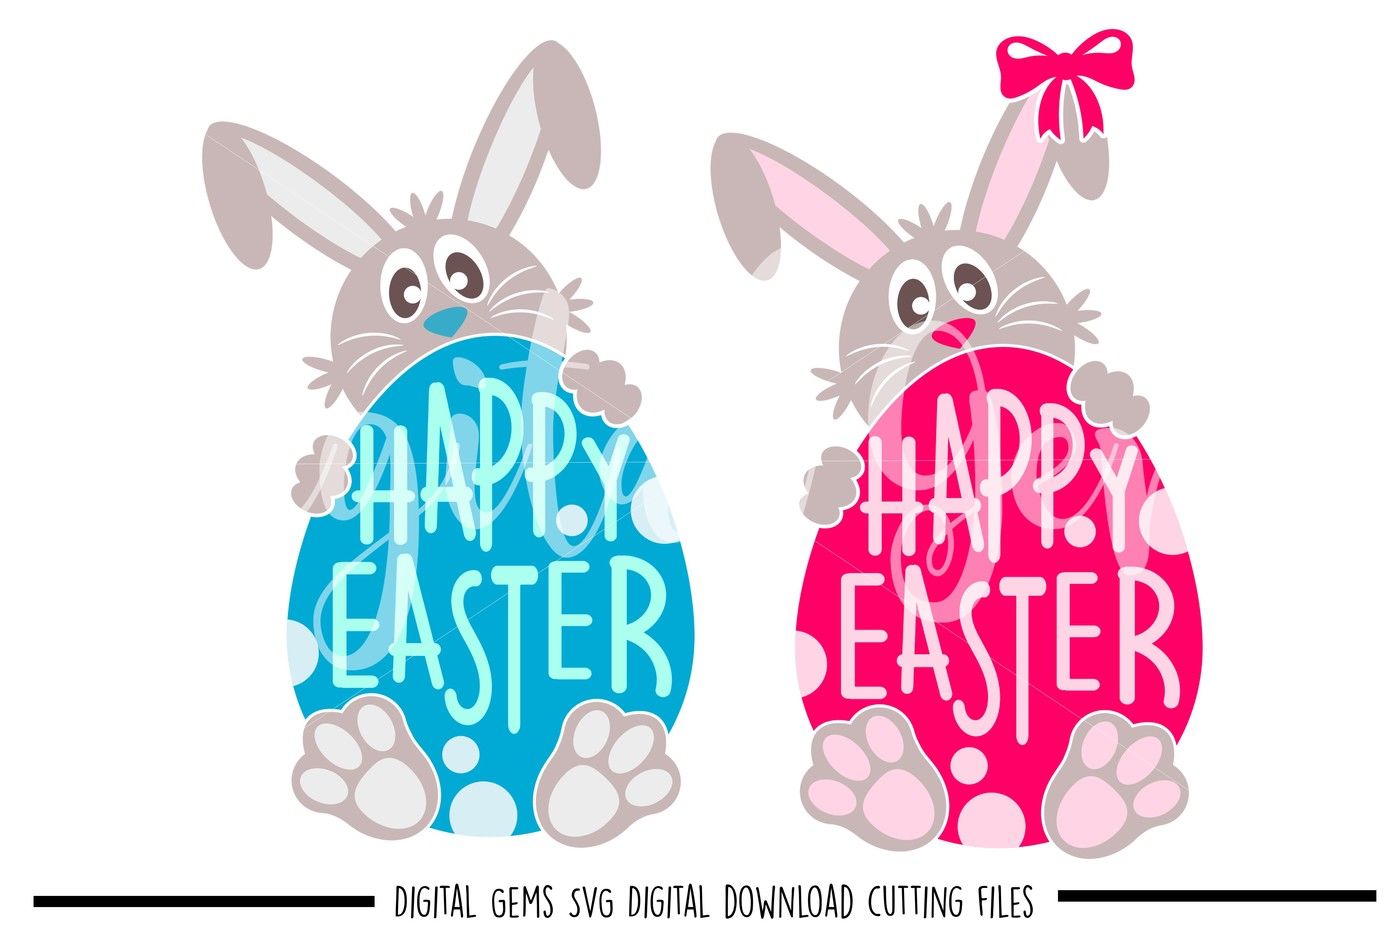 Easter SVG / DXF / EPS / PNG Files By Digital Gems | TheHungryJPEG